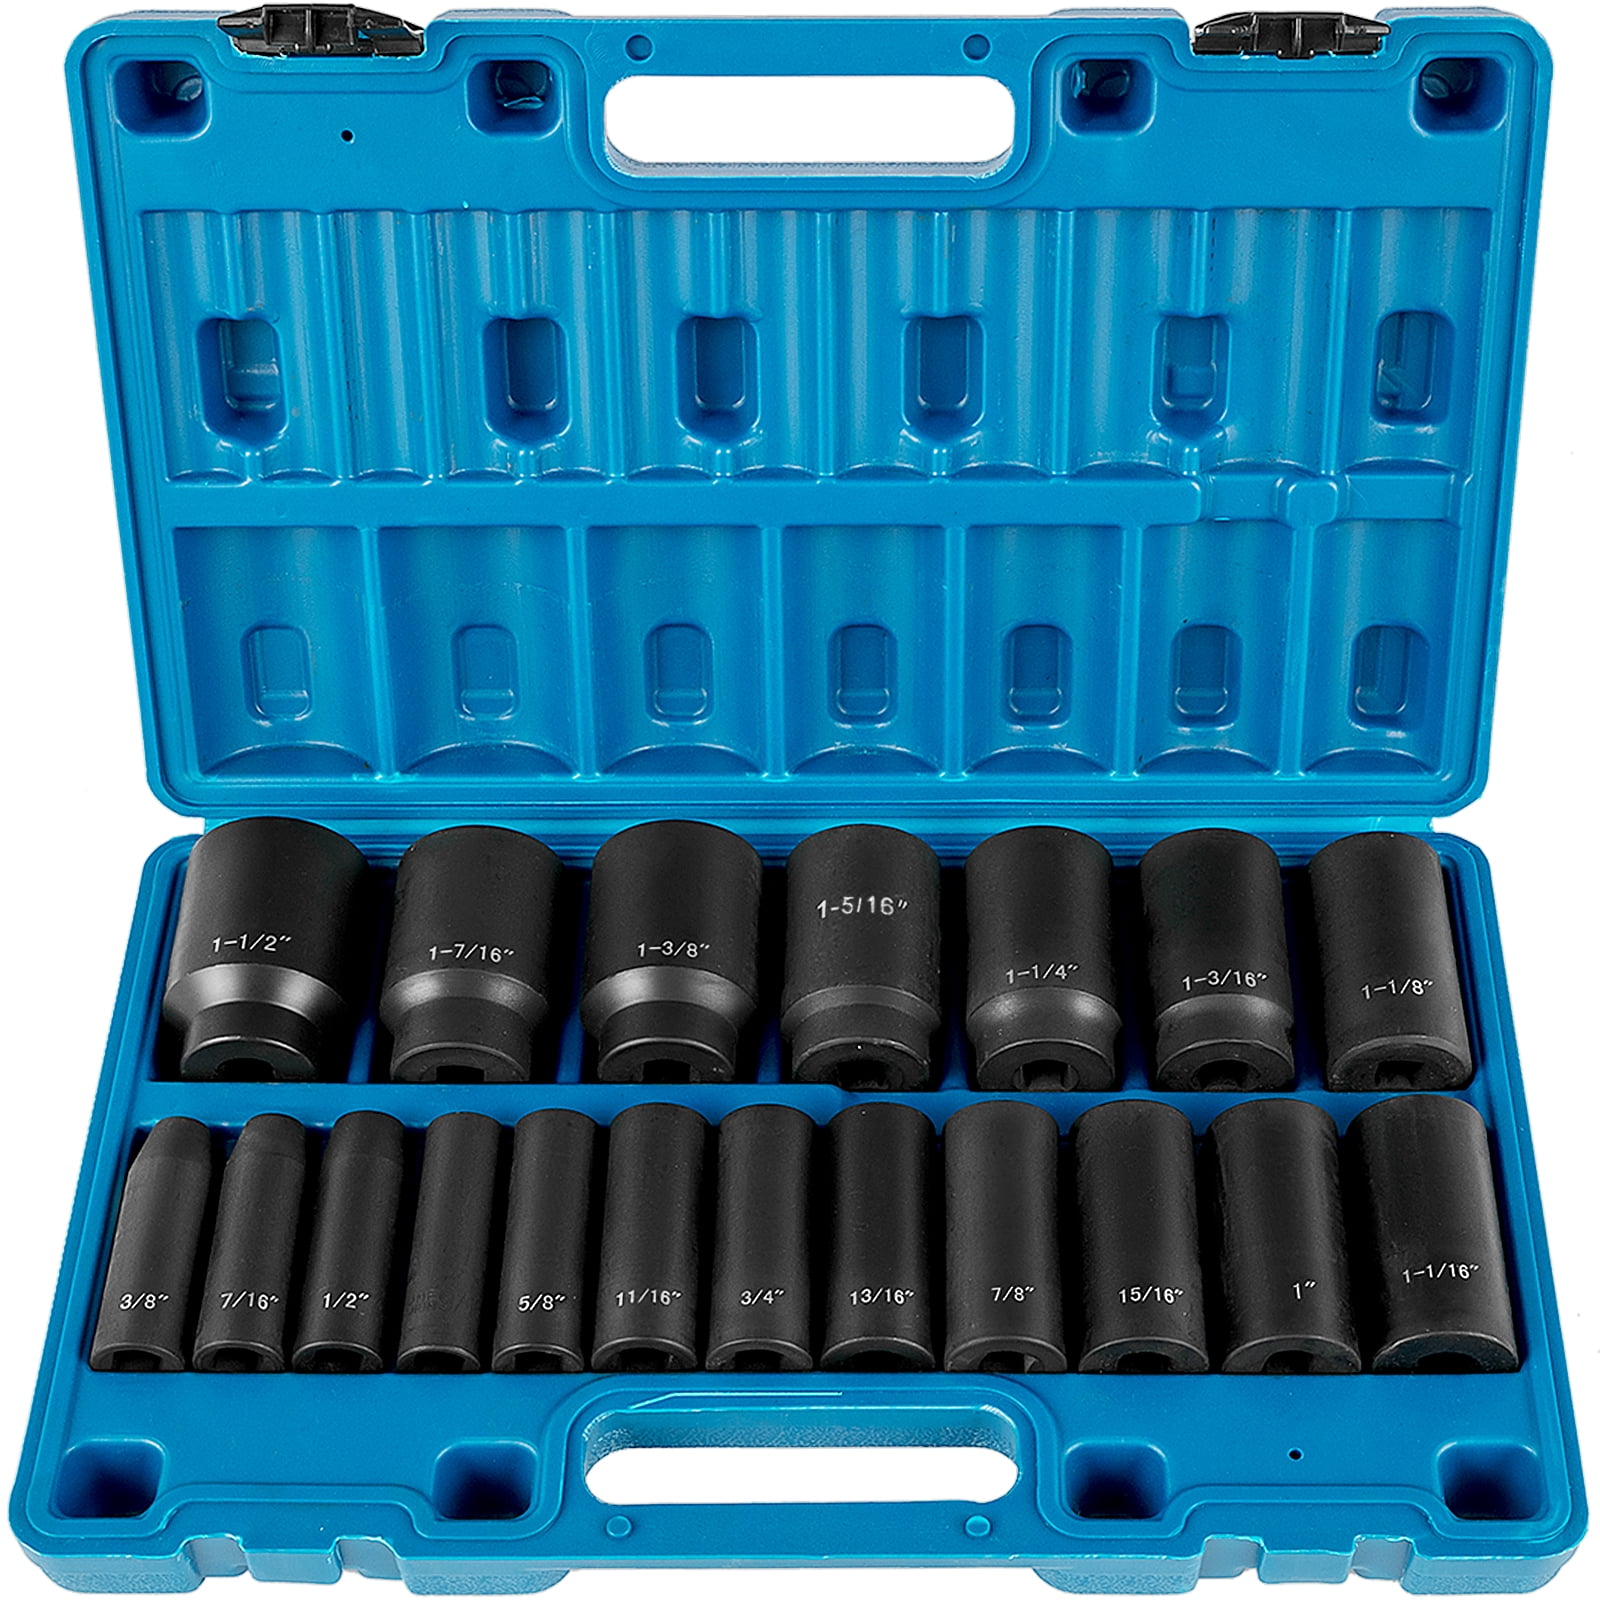 VEVOR Impact Socket Set 1/2 inches 19 Piece Impact Sockets, Deep Impact  Socket, 6-Point Sockets, Rugged Construction, Cr-V, 1/2inches Drive Socket  Set Impact 3/8 inch 1-1/2 inch, with a Storage Cage